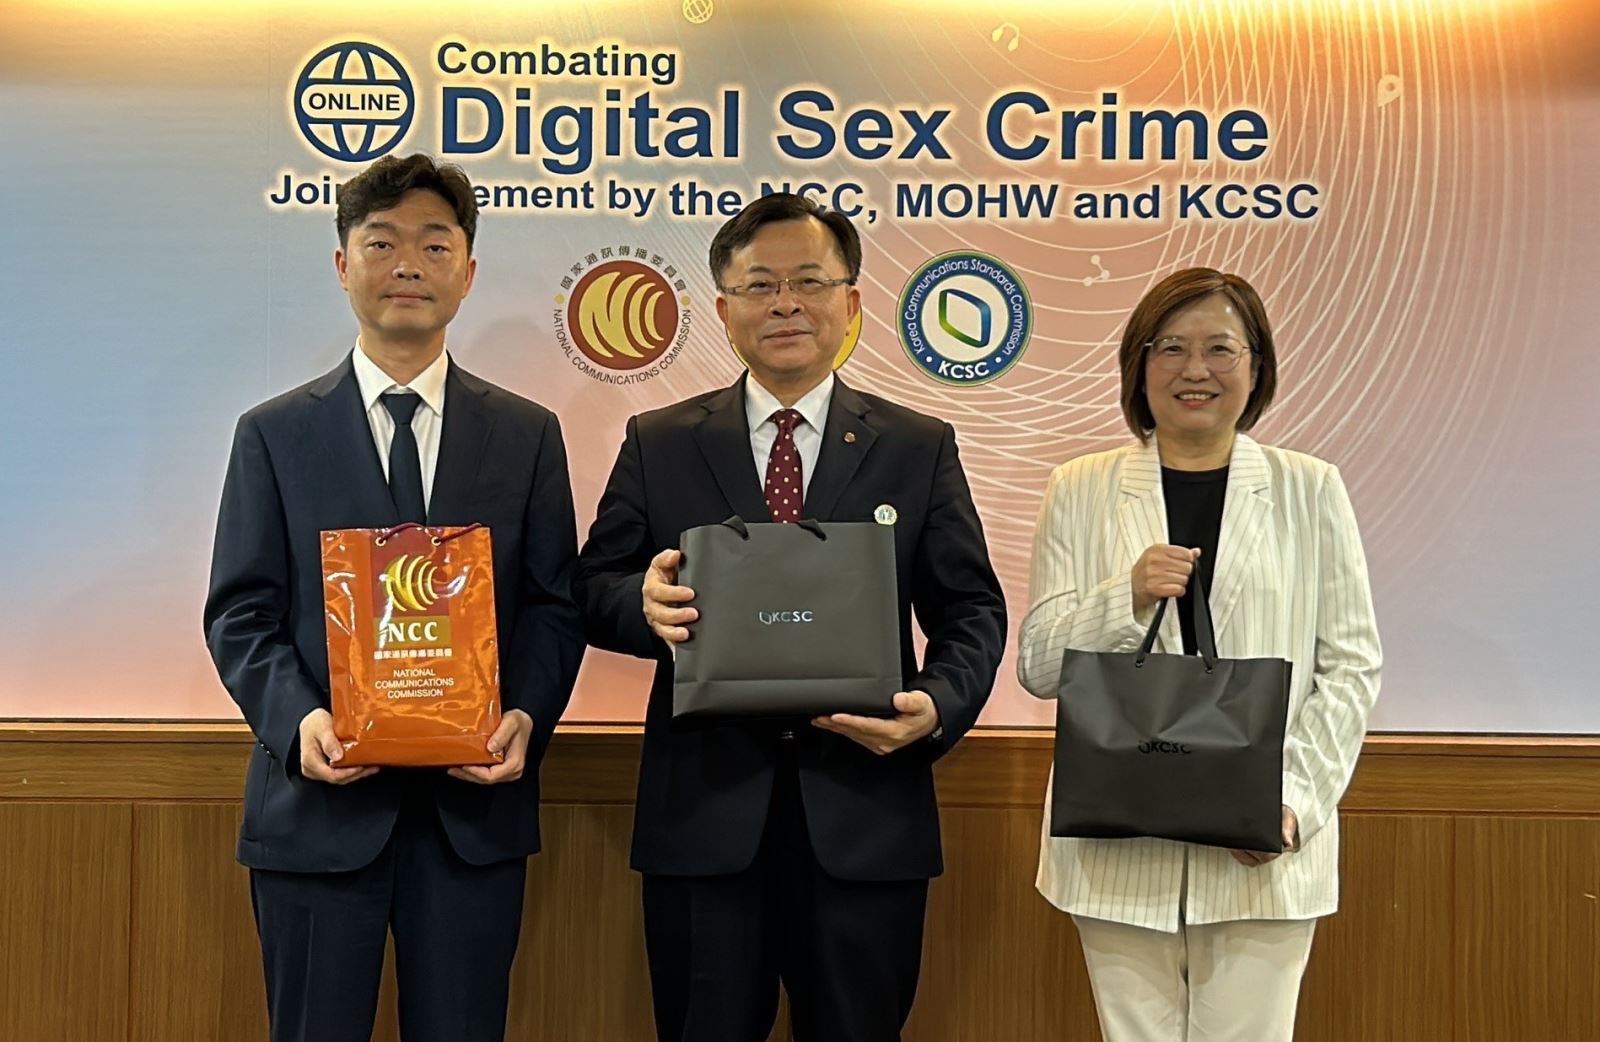 Photo 3: NCC Chairperson Chen Yaw-Shyang (center), MOHW Deputy Minister Lee Li-Feng (right) and KCSC Head of Digital Sex Crime Content Review Bureau Lee Dong-su (left) exchange gifts.